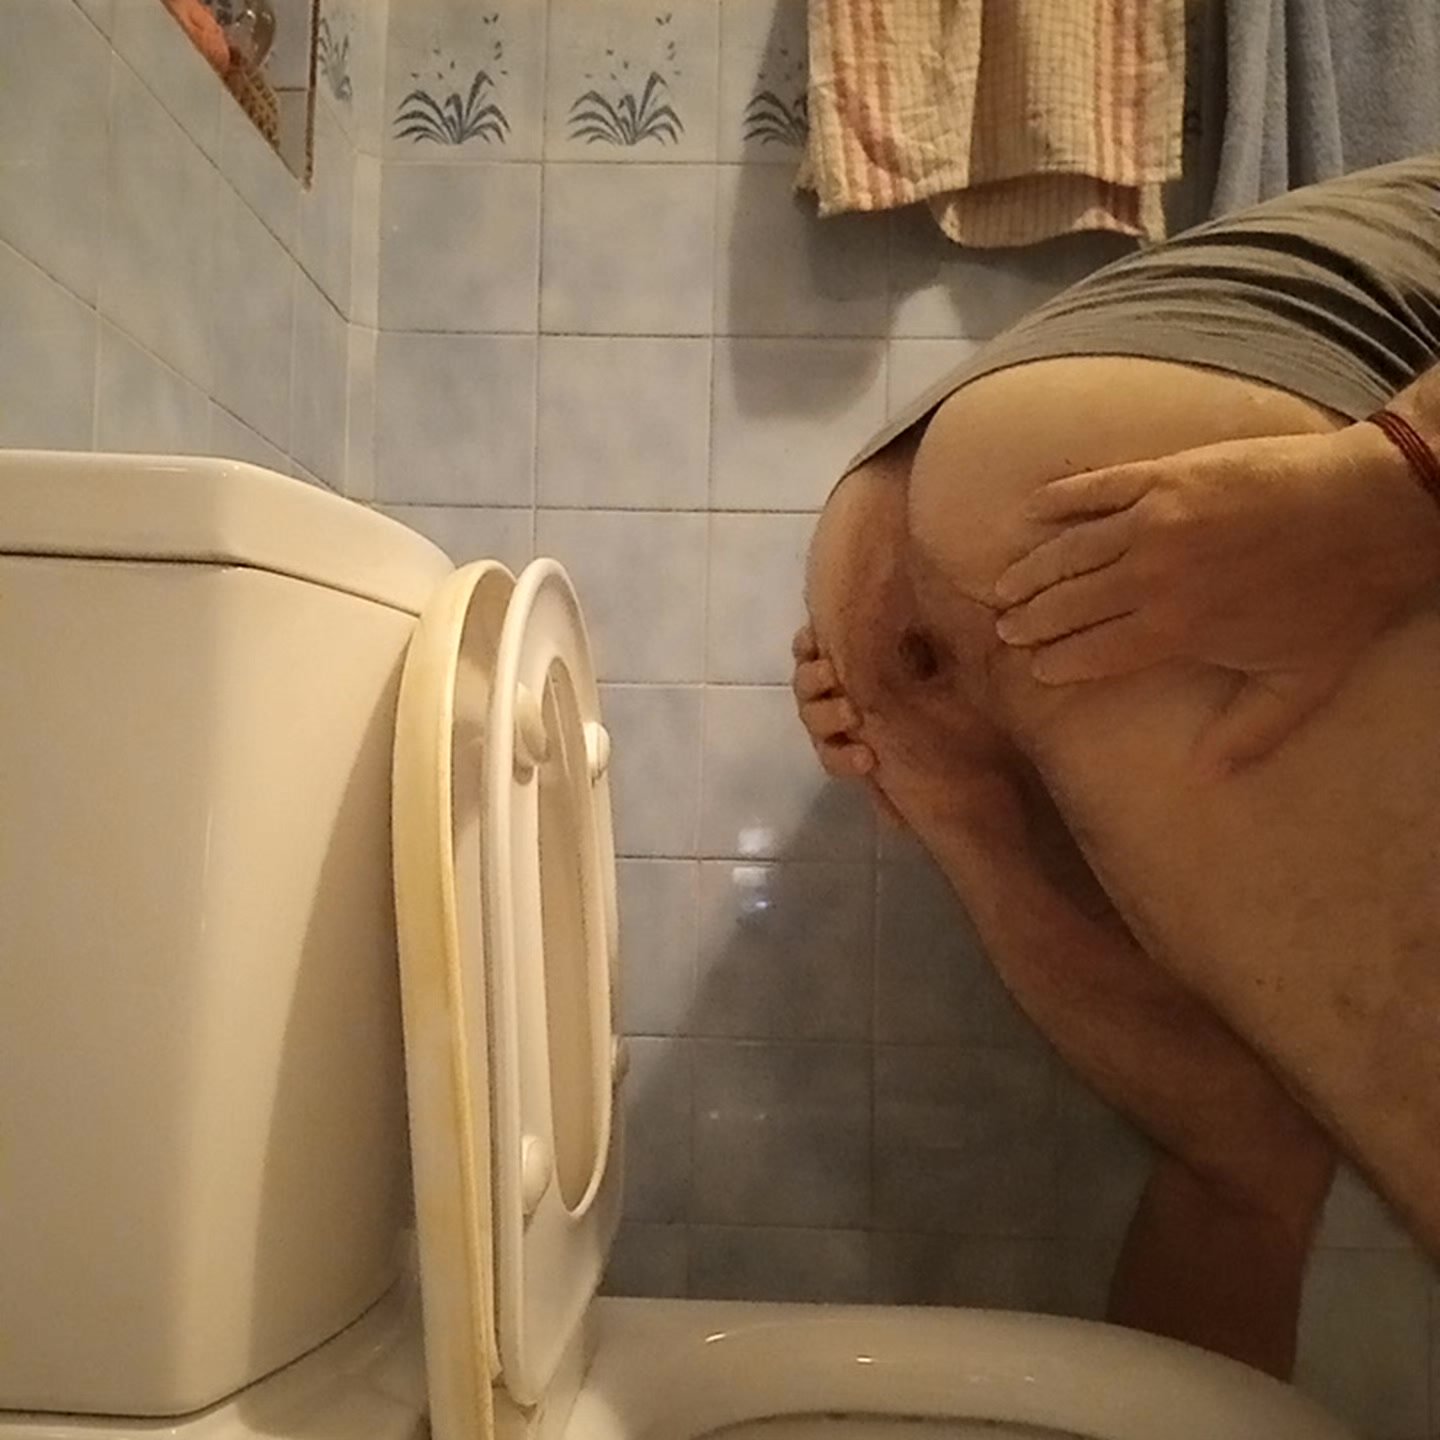 Huge hover shit and long piss